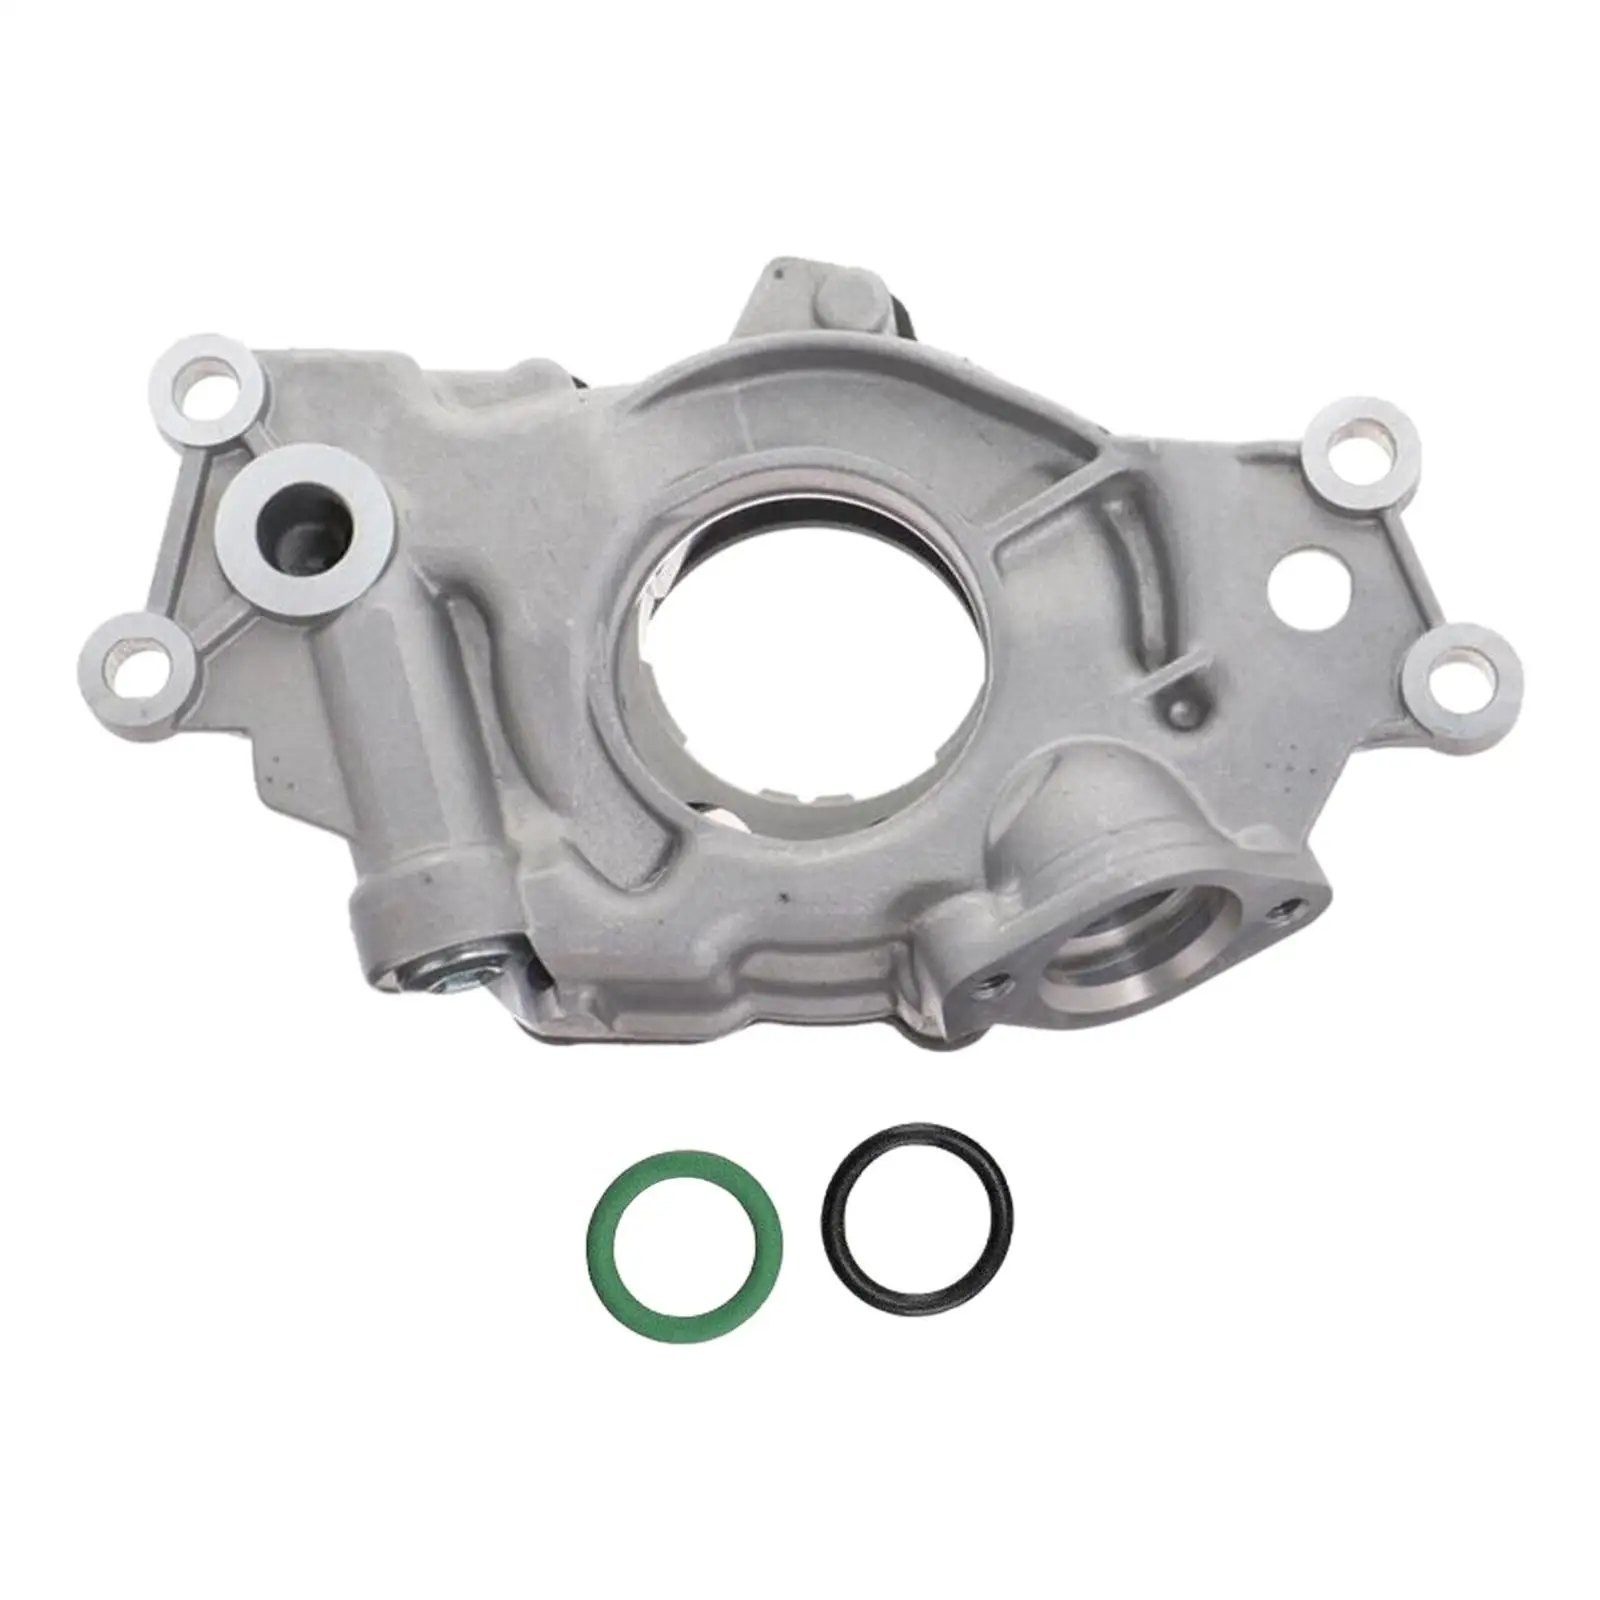 

Oil Pump Alloy Professional Quality High Performance Direct Replace Easy Installation M365hv for Lmf L76 Lsa L92 L99